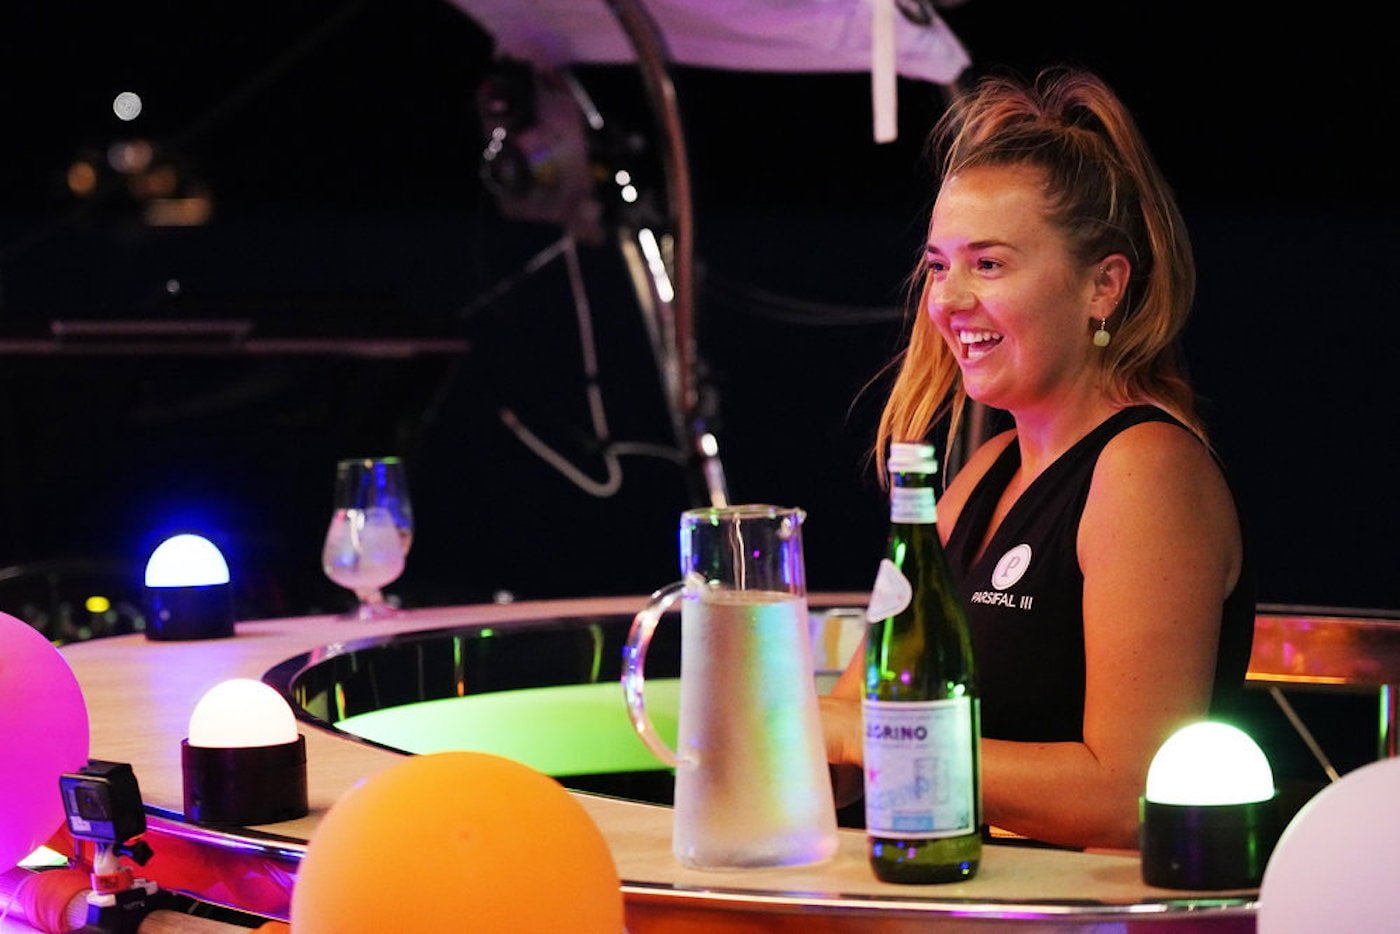 Daisy Kelliher from 'Below Deck Sailing Yacht' stands behind a bar